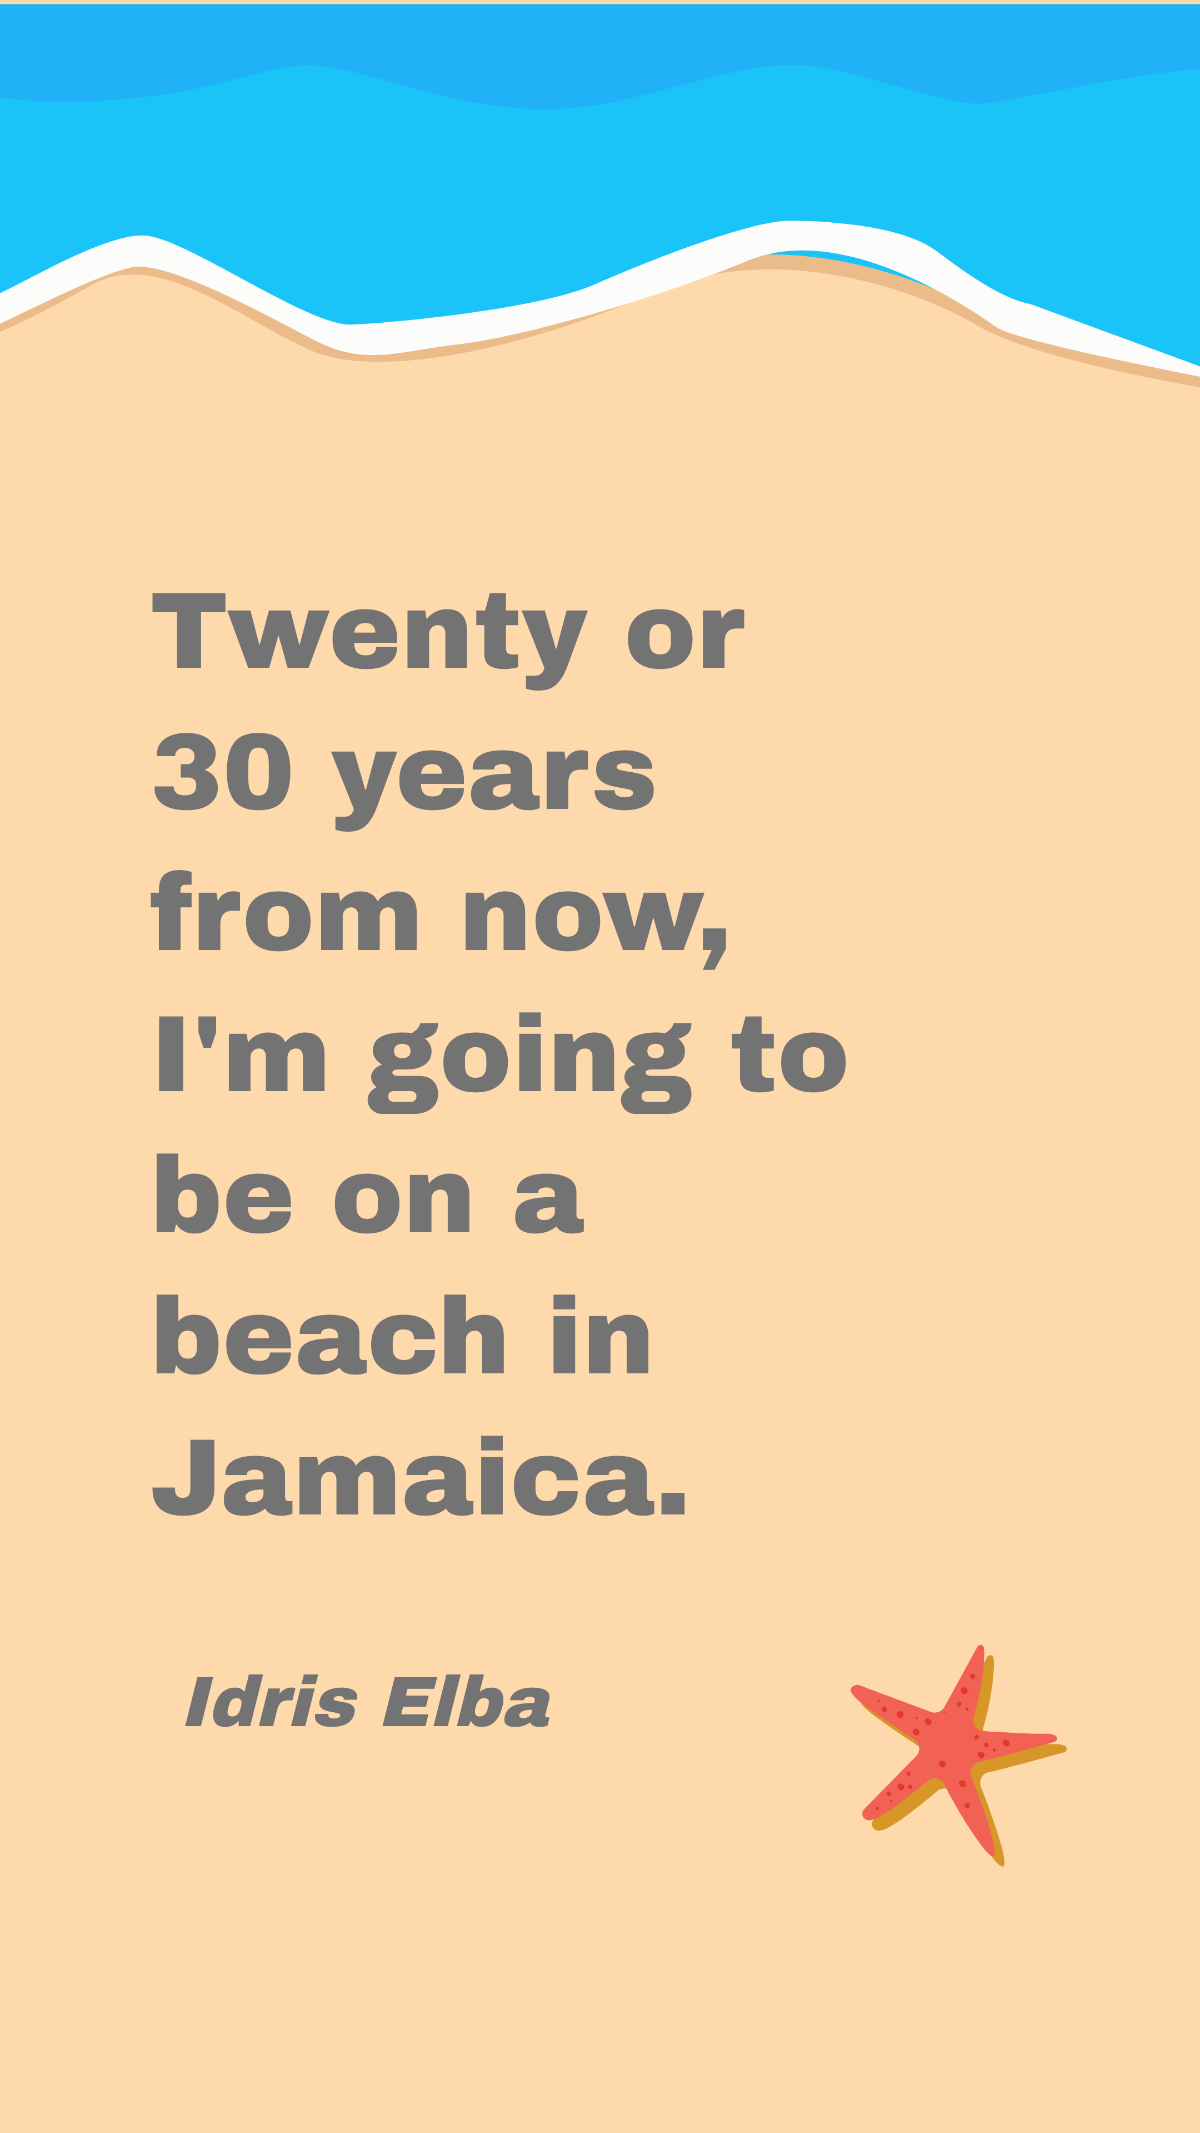 Idris Elba - Twenty or 30 years from now, I'm going to be on a beach in Jamaica. Template